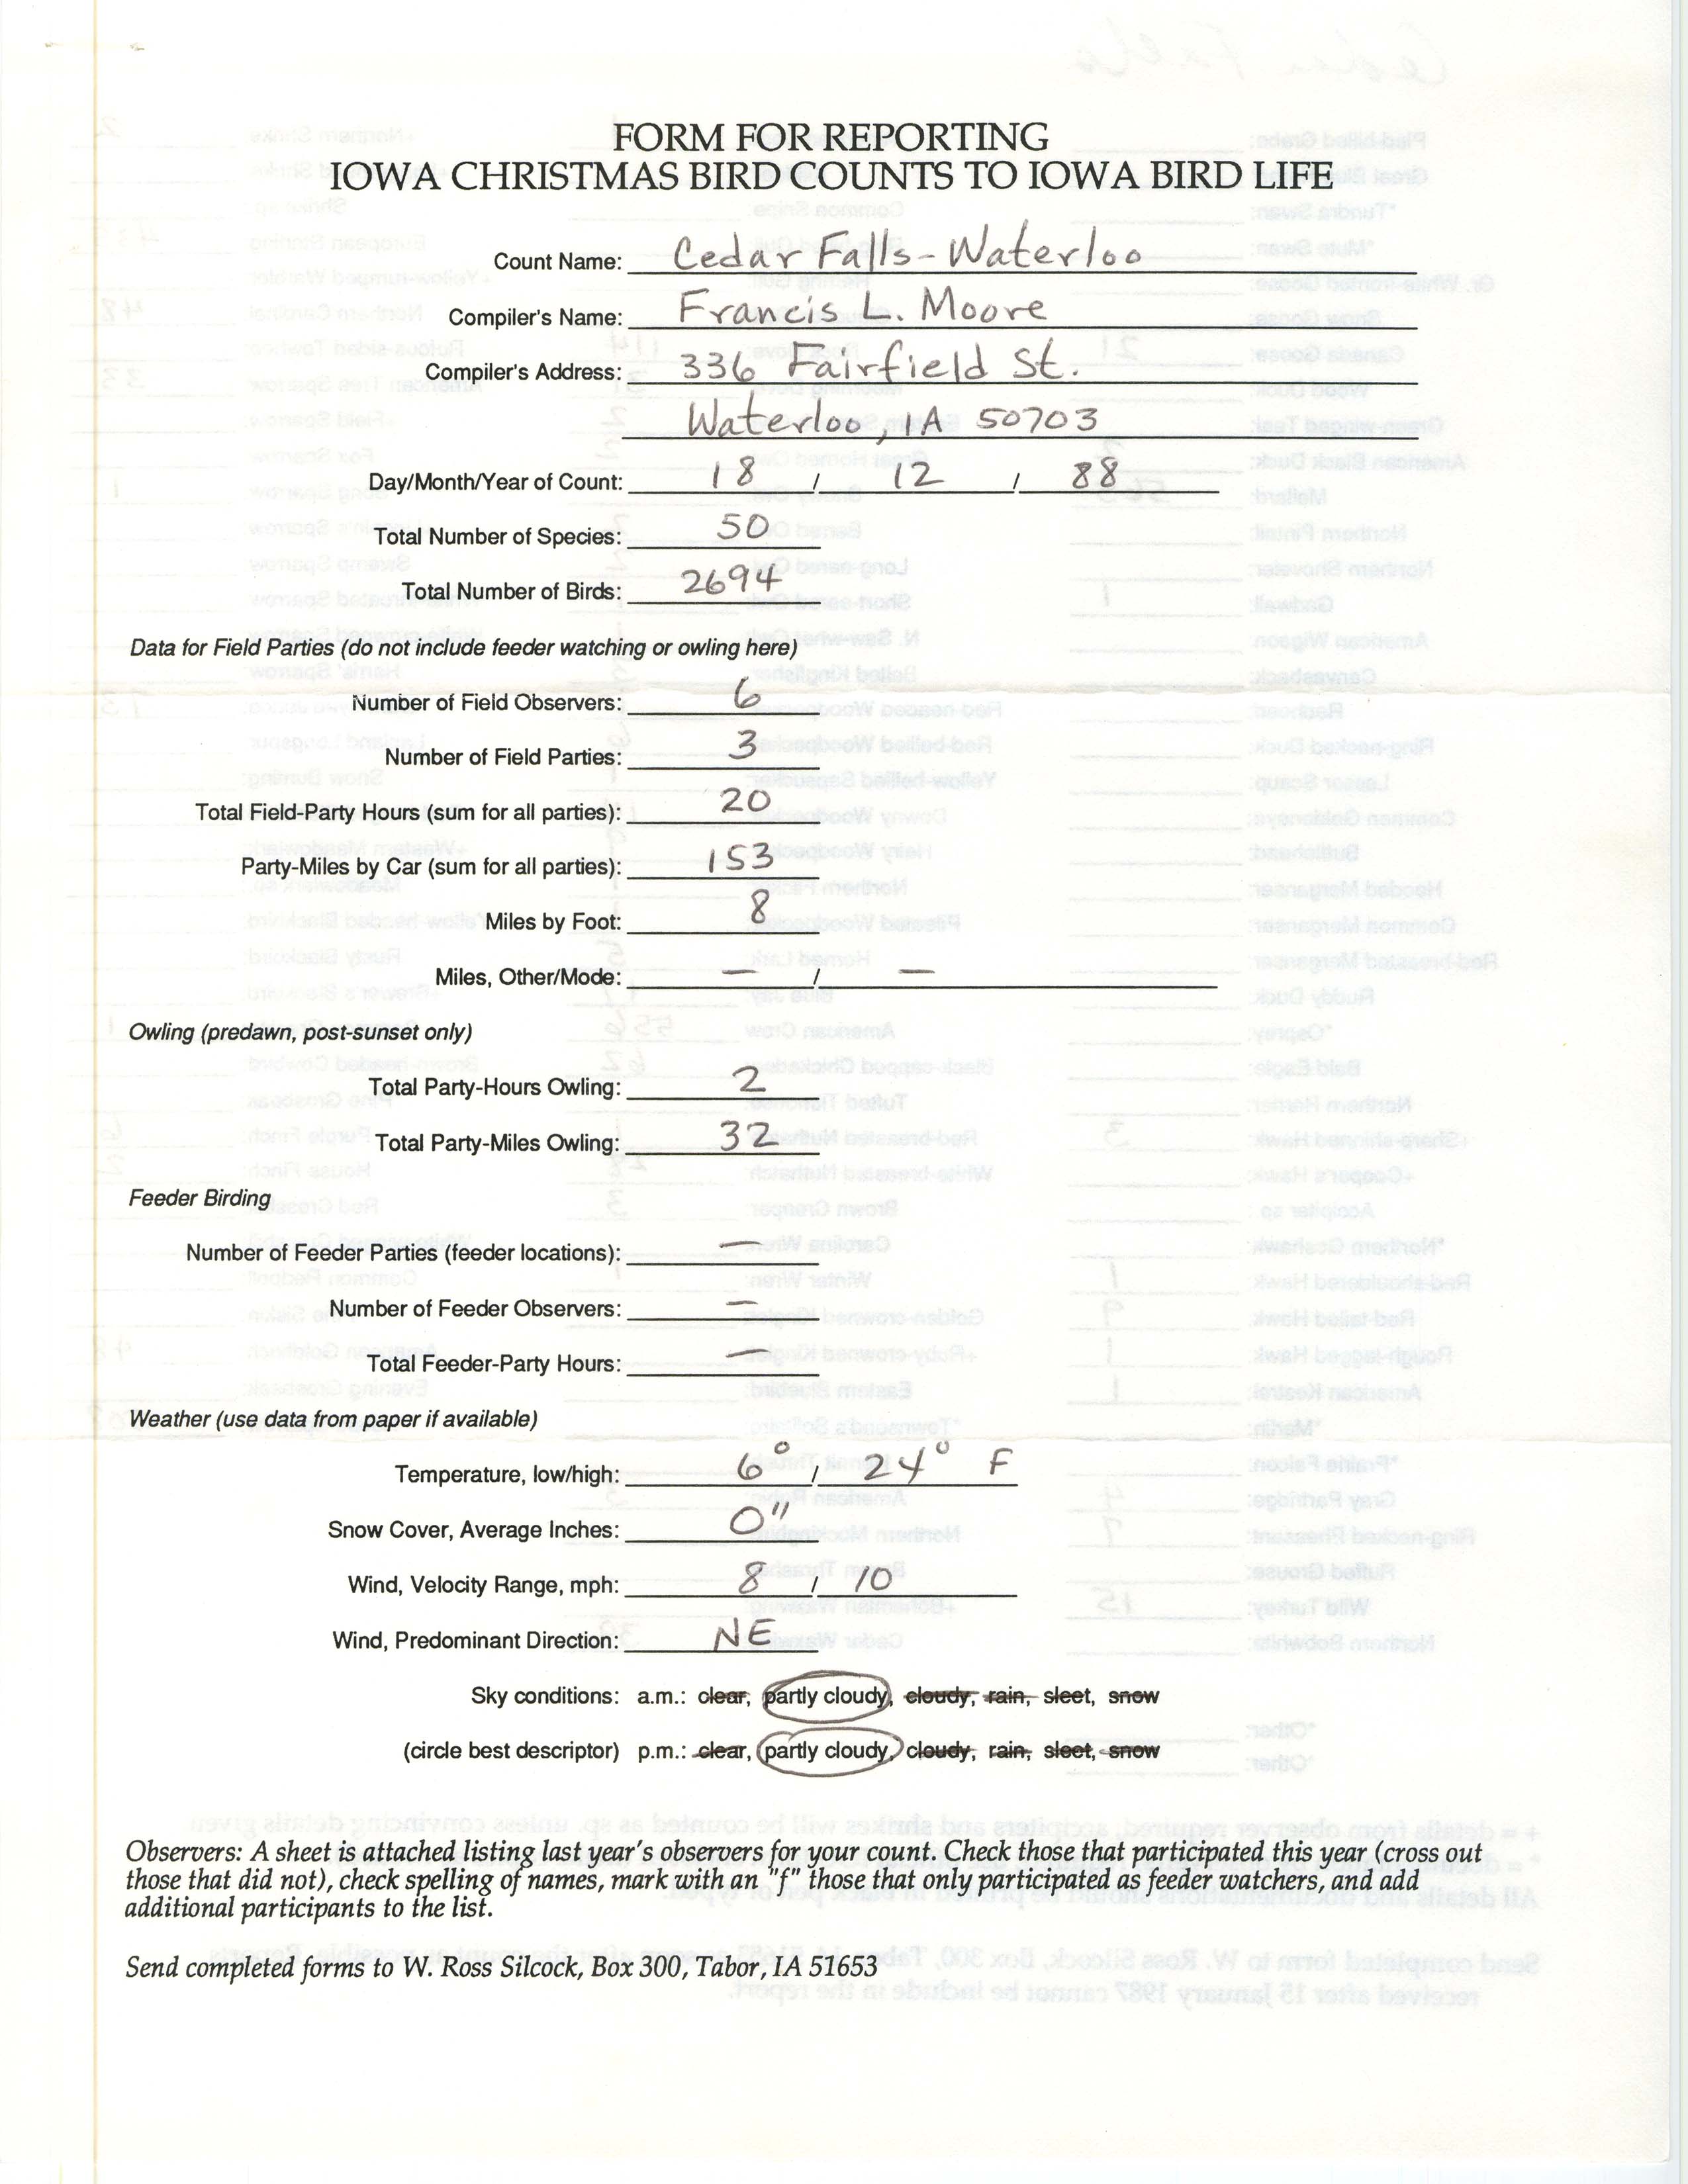 Form for reporting Iowa Christmas bird counts to Iowa Bird Life, Francis L. Moore, December 18, 1988